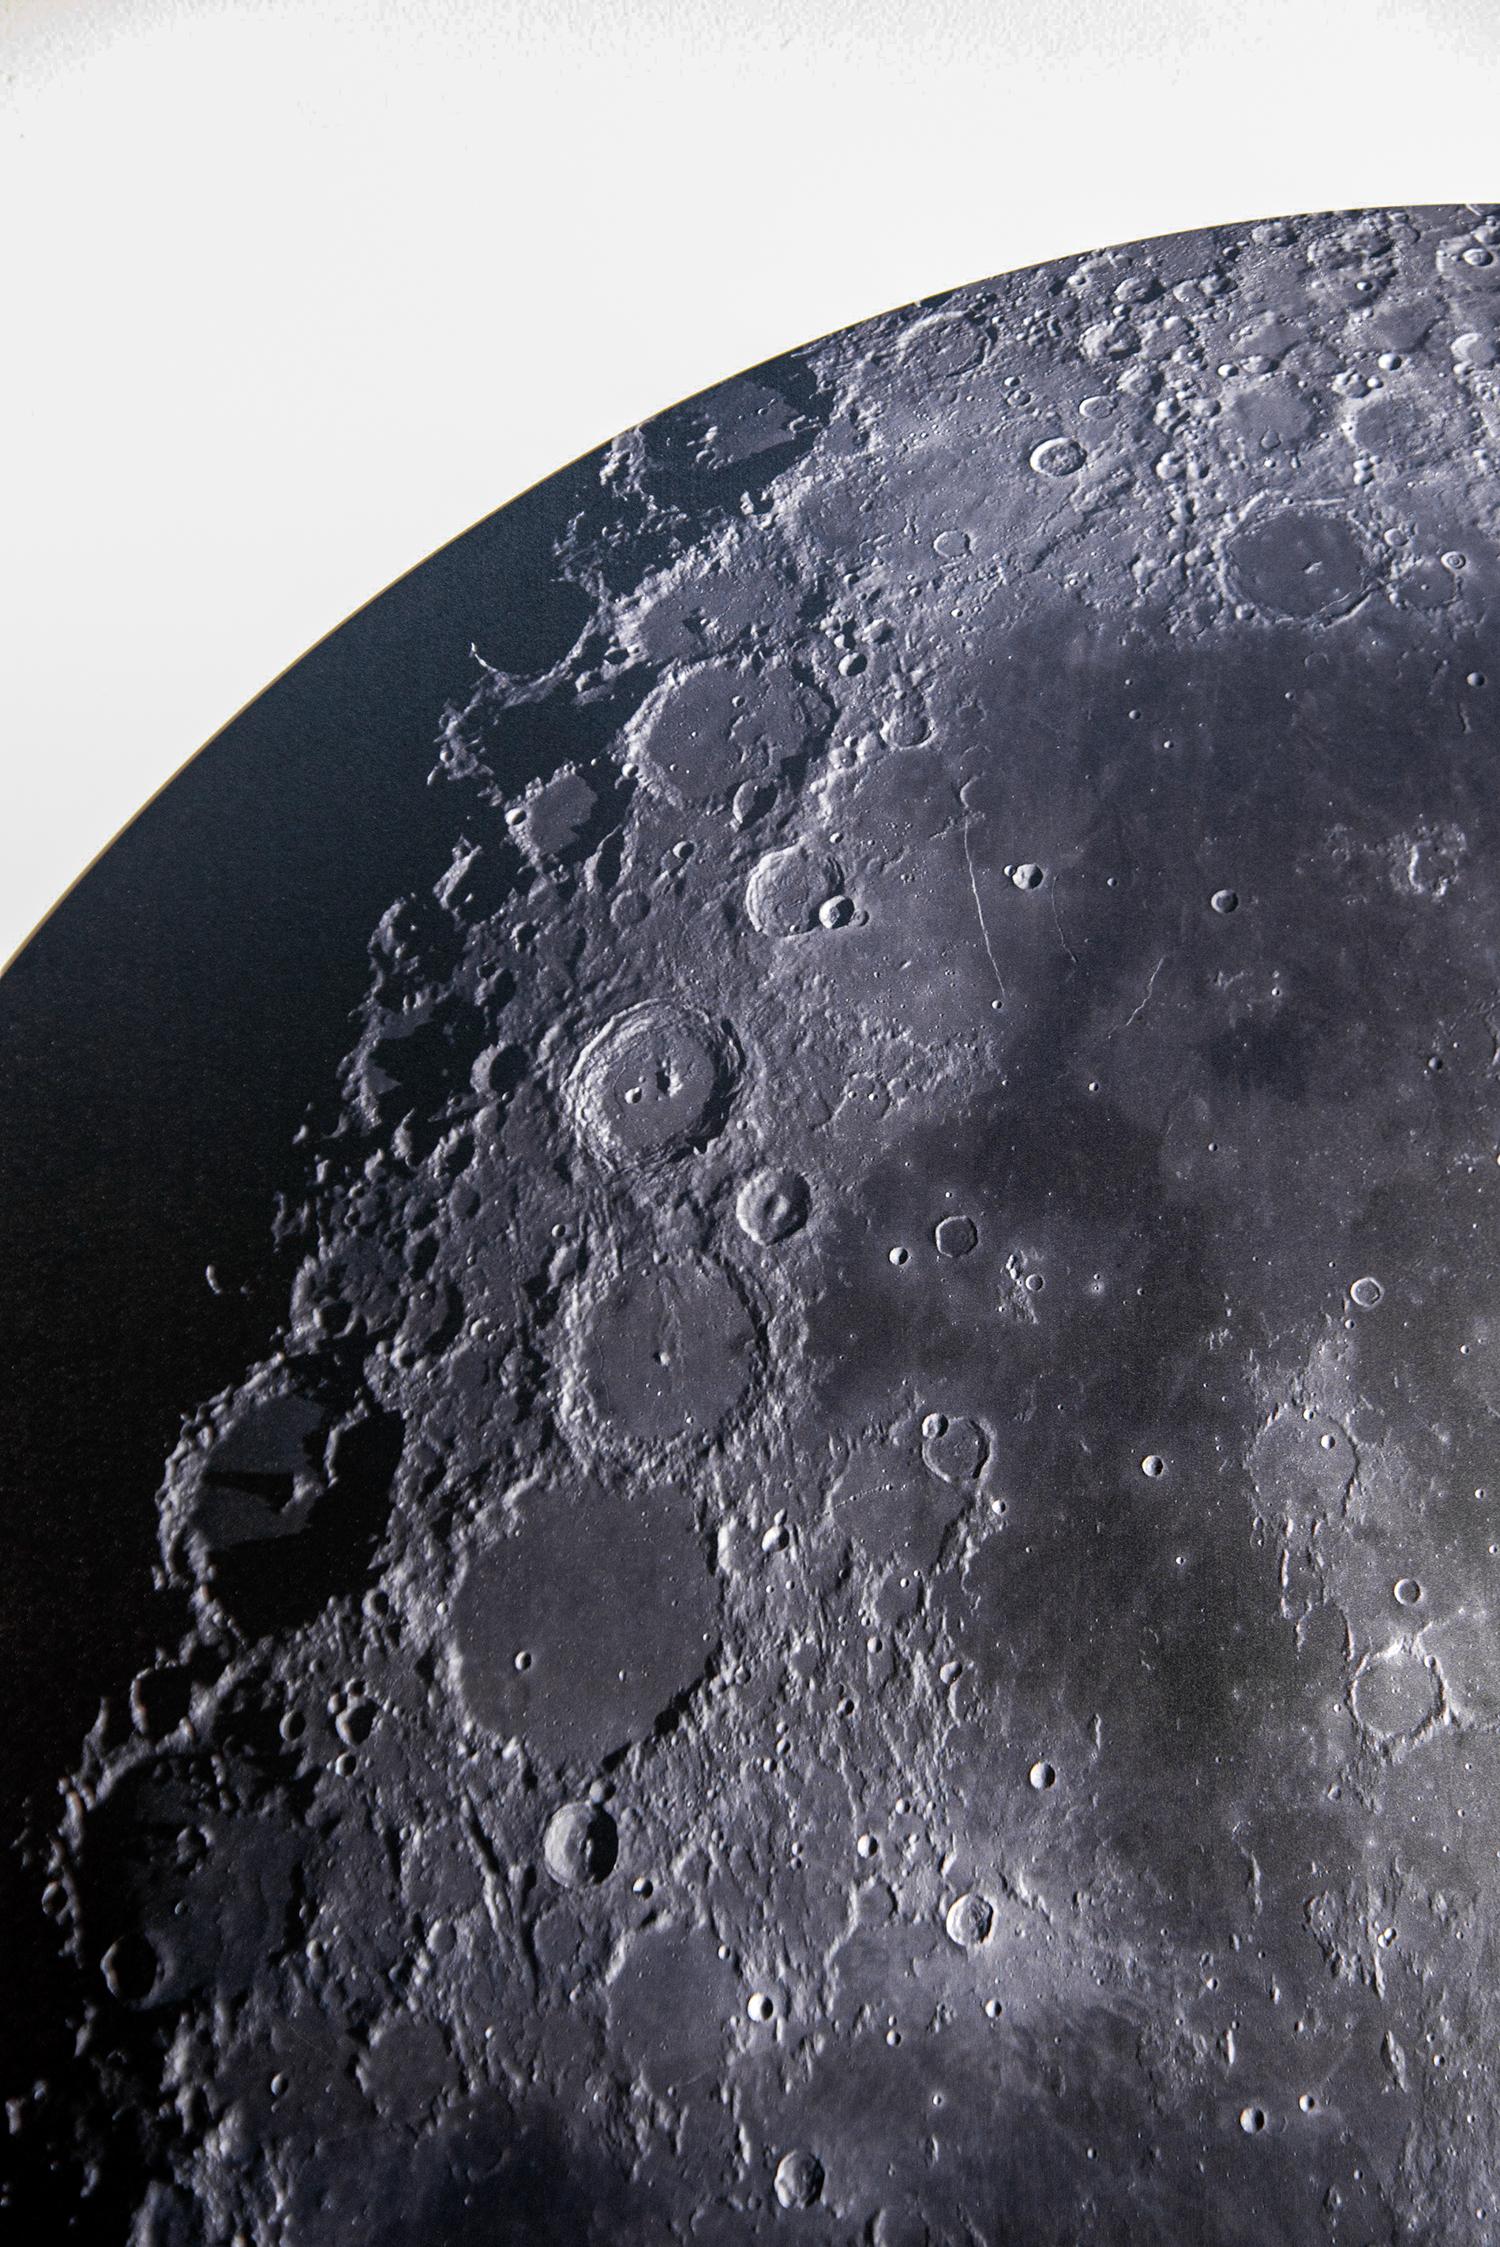 As a child, Ryan Van Der Hout owned a telescope and was fascinated by the sight of the moon in the night sky. This iconic image of the moon as viewed from earth is re-imagined when Van Der Hout folds the full colour photographic print he created.